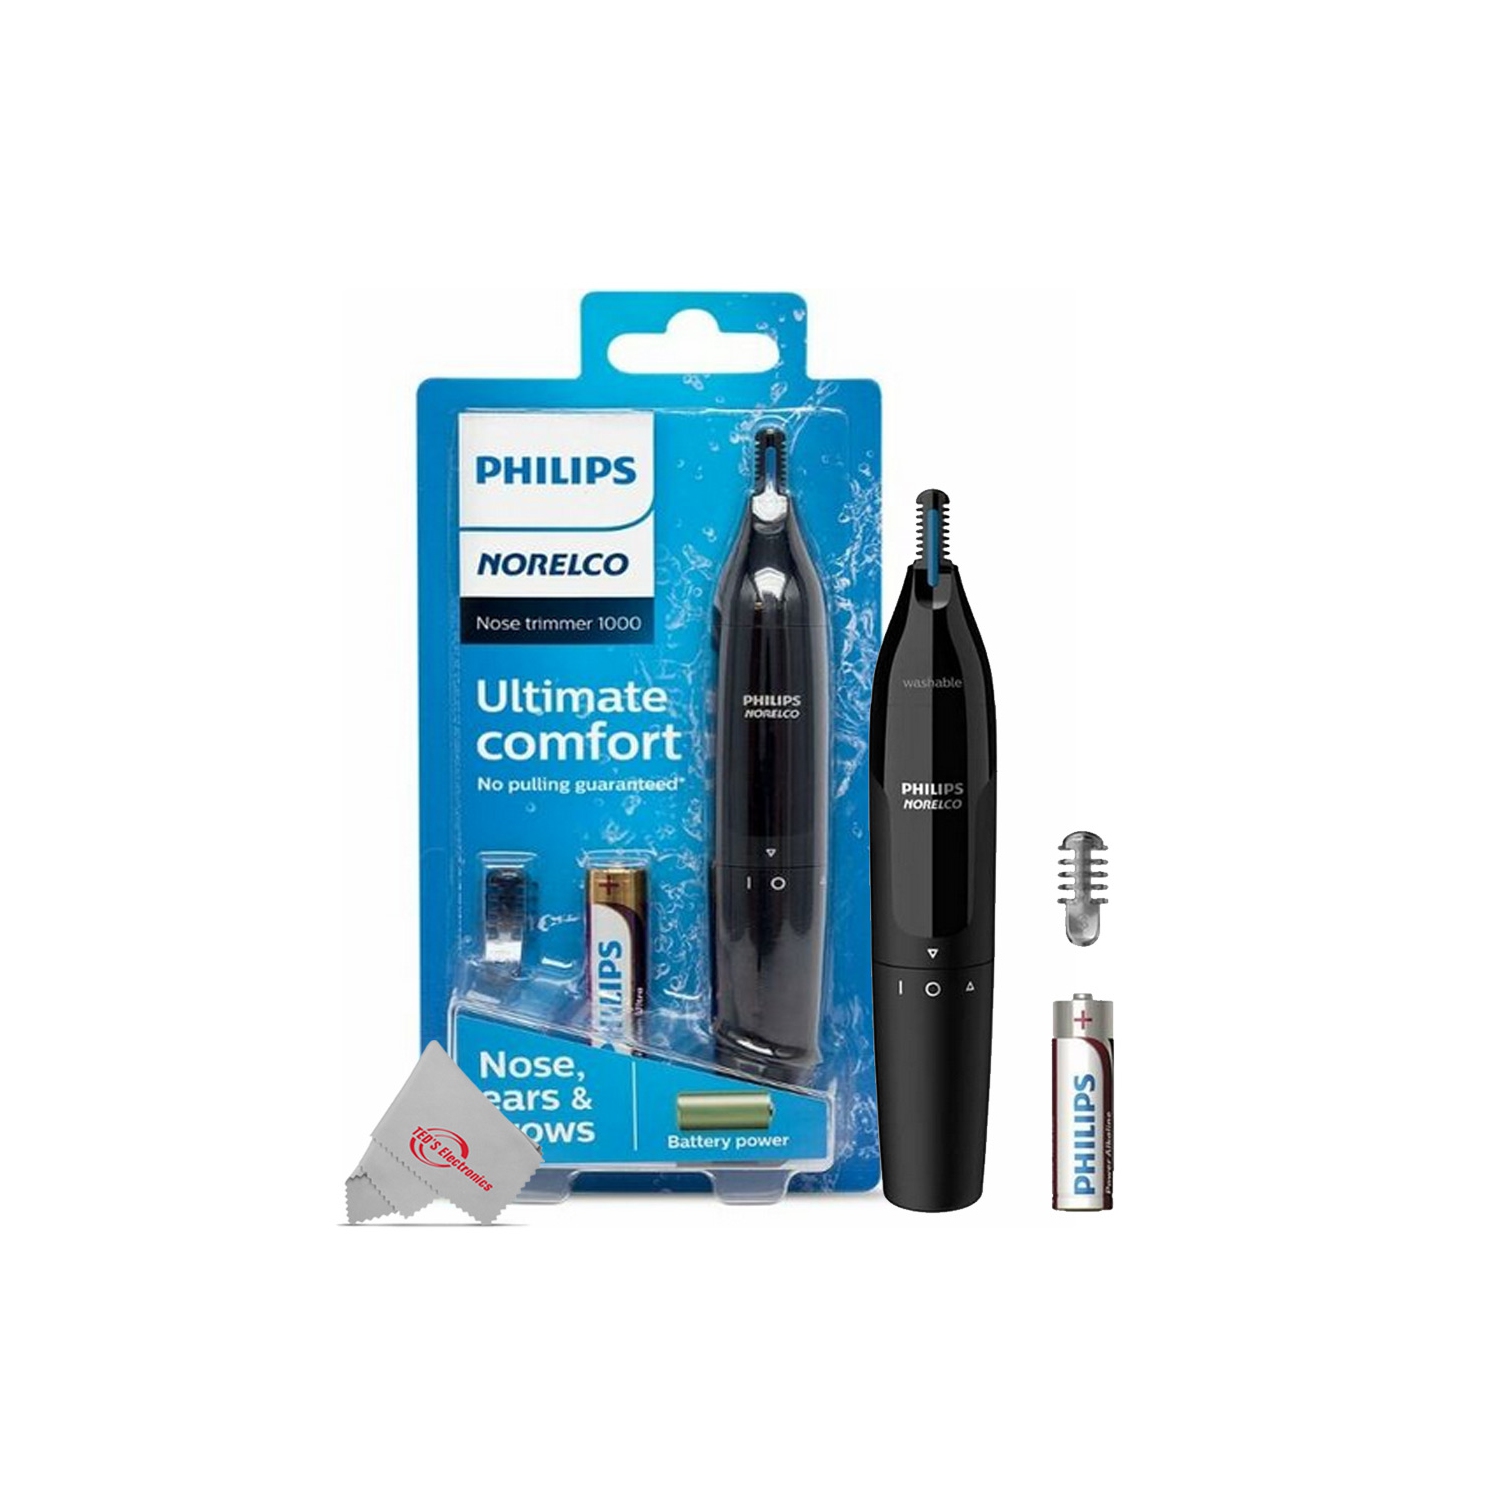 Philips Norelco Ultimate Comfort Nose Trimmer 1000 Battery Powered NT1605/60 for Nose, Ear, and Eyebrows